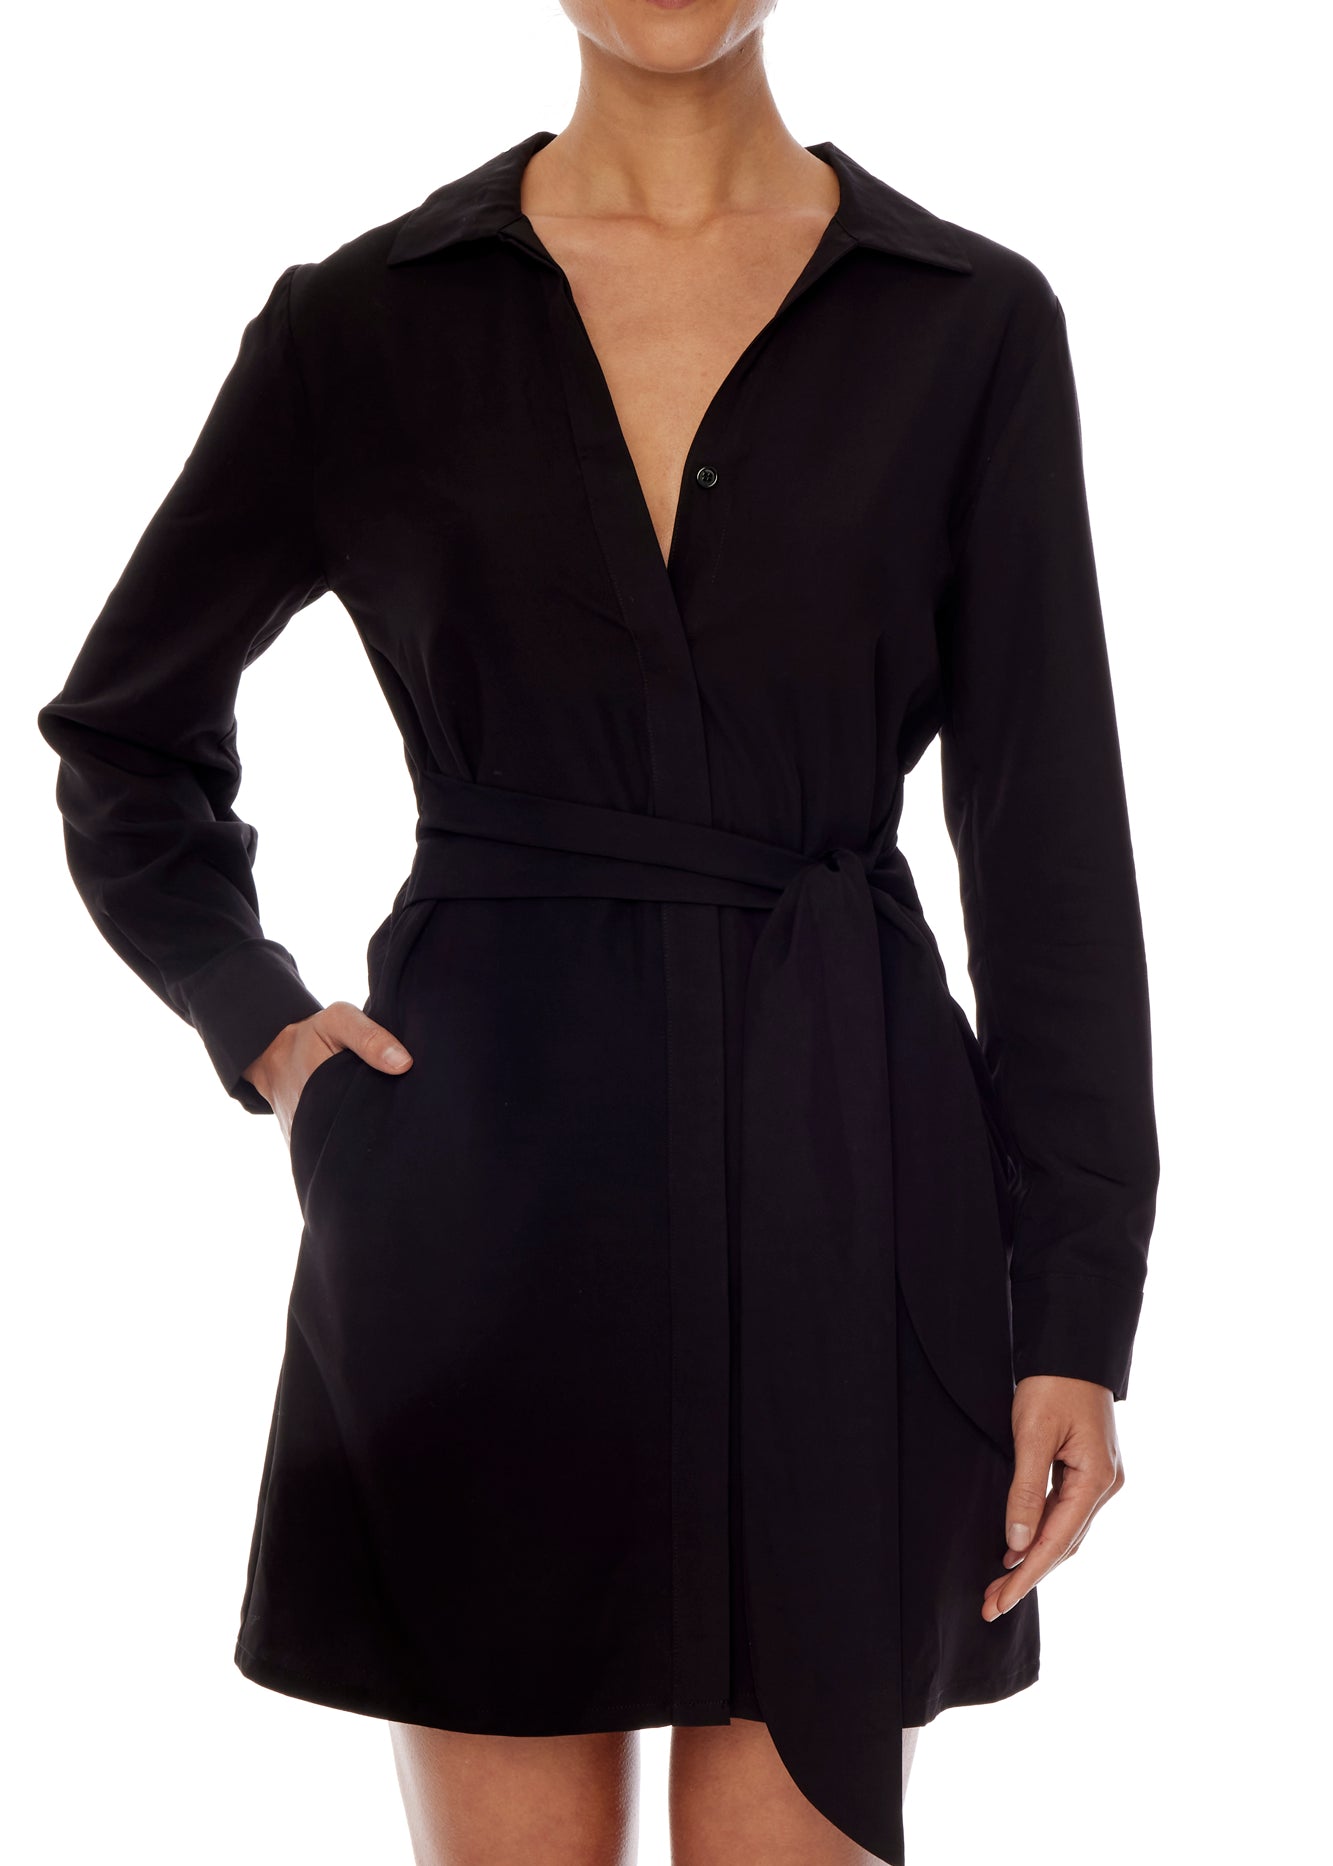 button down dress with long cuffed sleeves, collar, tie waist, cinched back,  pockets and mini length in black